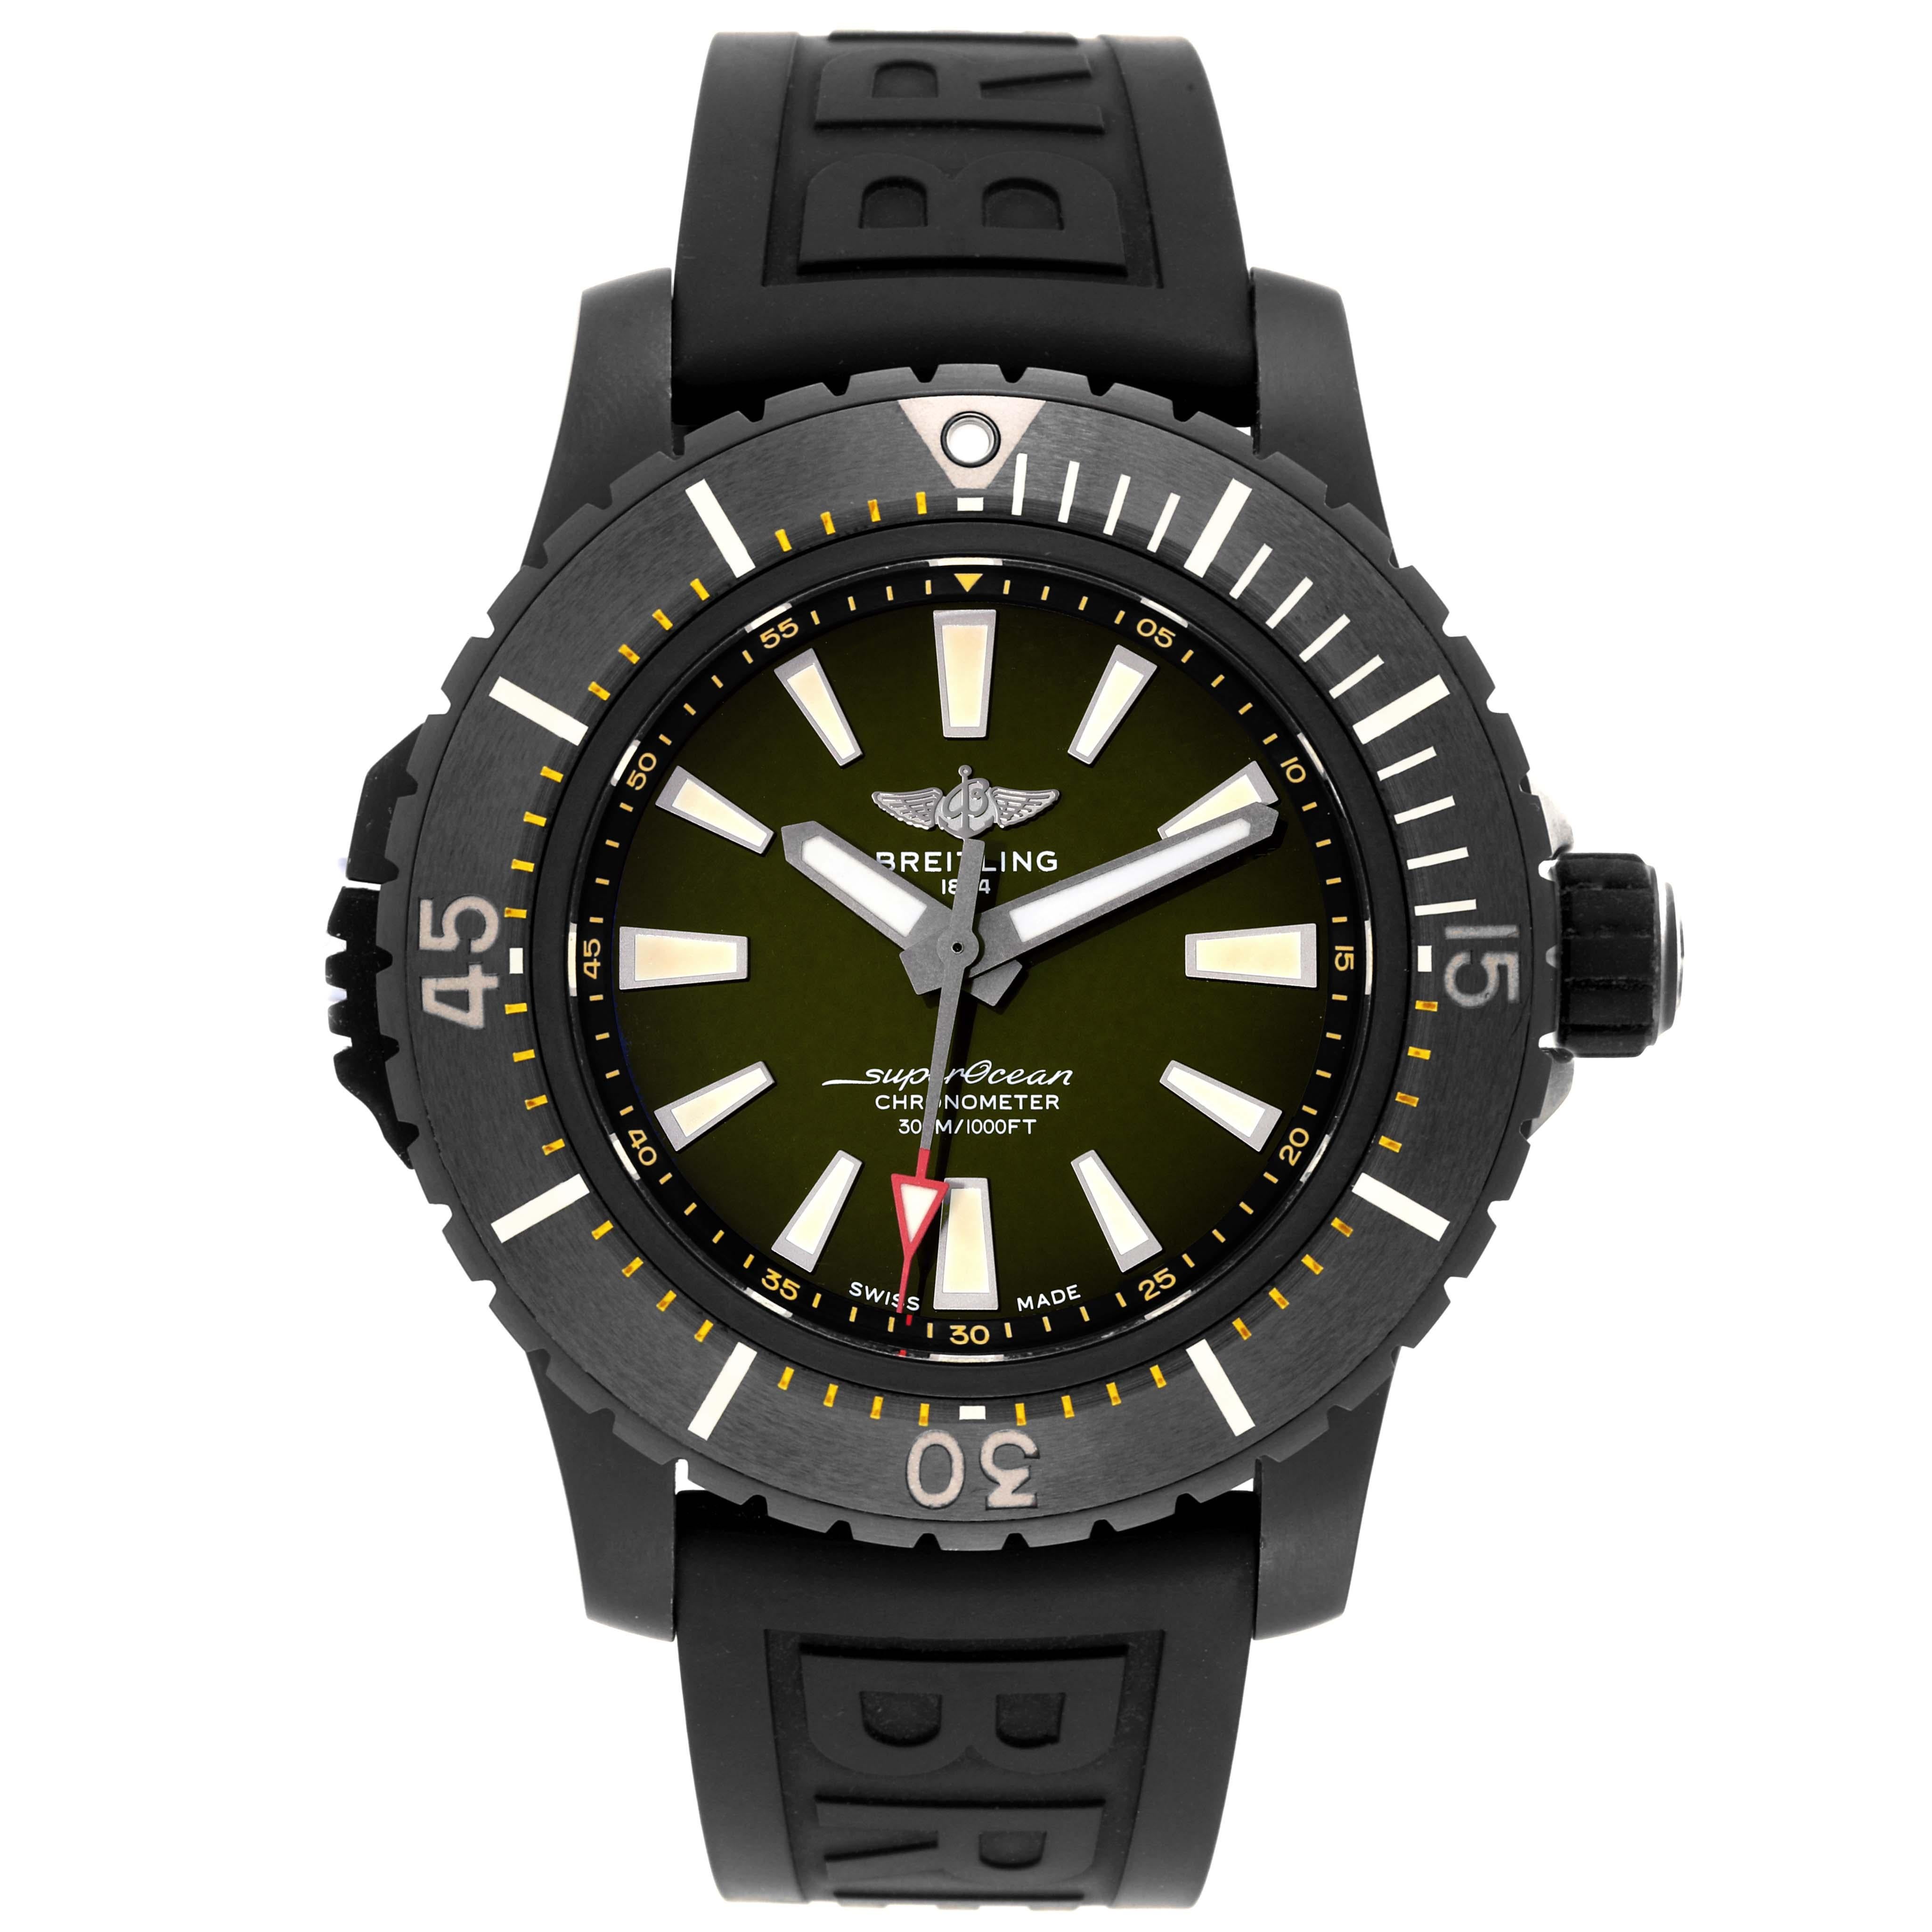 Breitling Superocean 48 Green Dial Titanium Mens Watch V17369 Box Card. Automatic self-winding movement. DLC coated titanium case 48.0 mm in diameter. Rubberized screw down crown. DLC-coated titanium bidirectional rotating bezel with locking